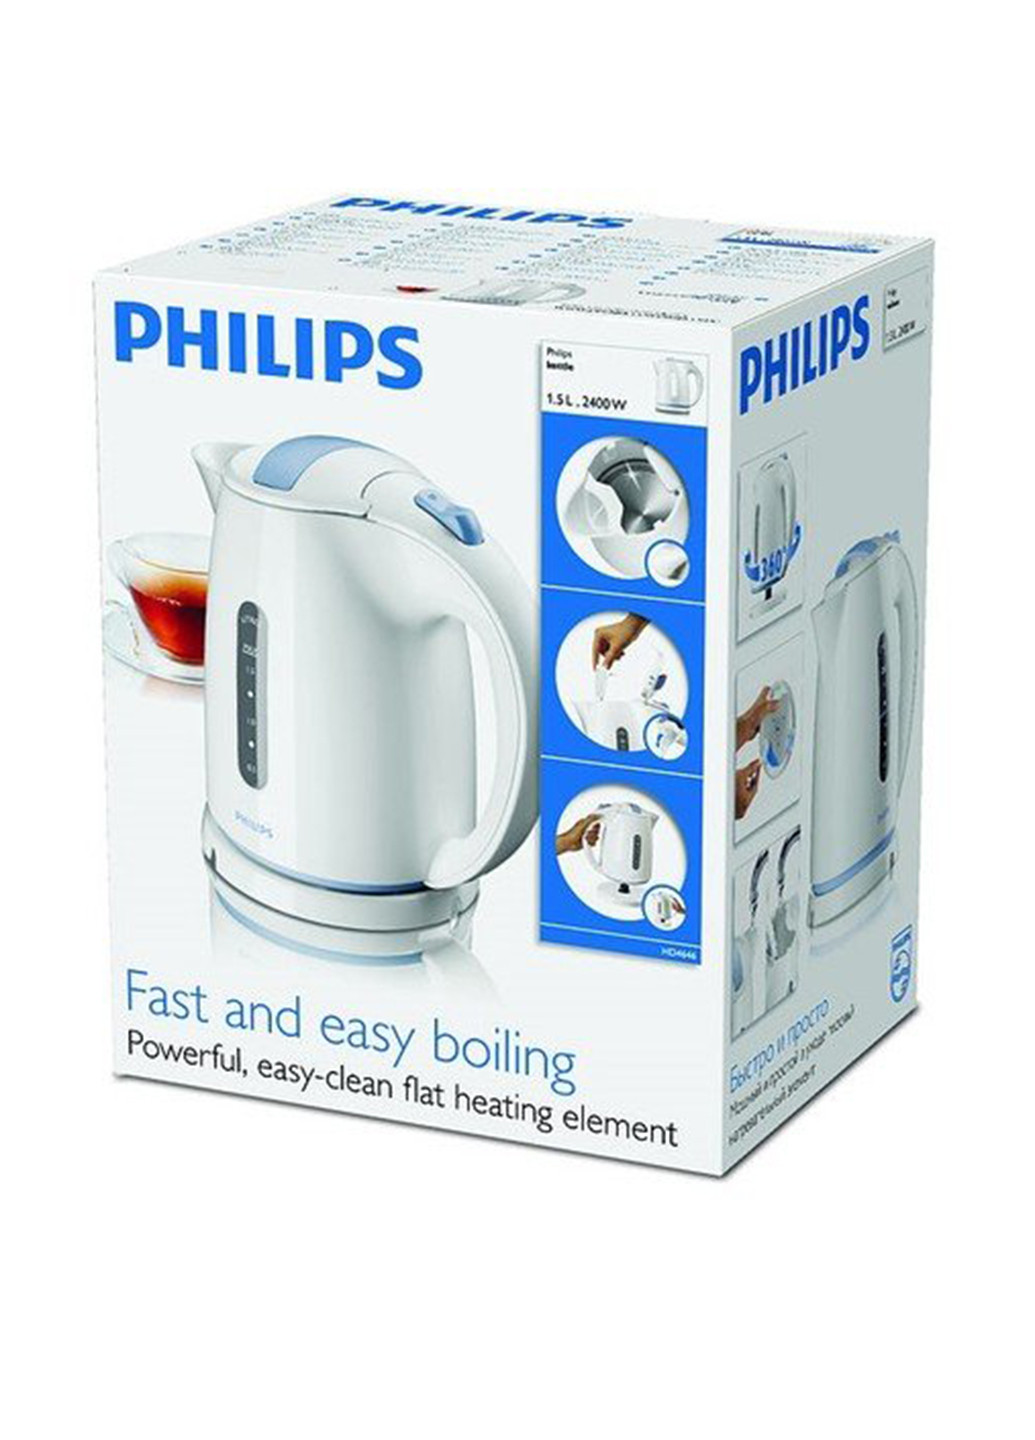 Електрочайник Daily Collection HD4646 / 70 White-Blue Philips hd4646/70 (129869563)